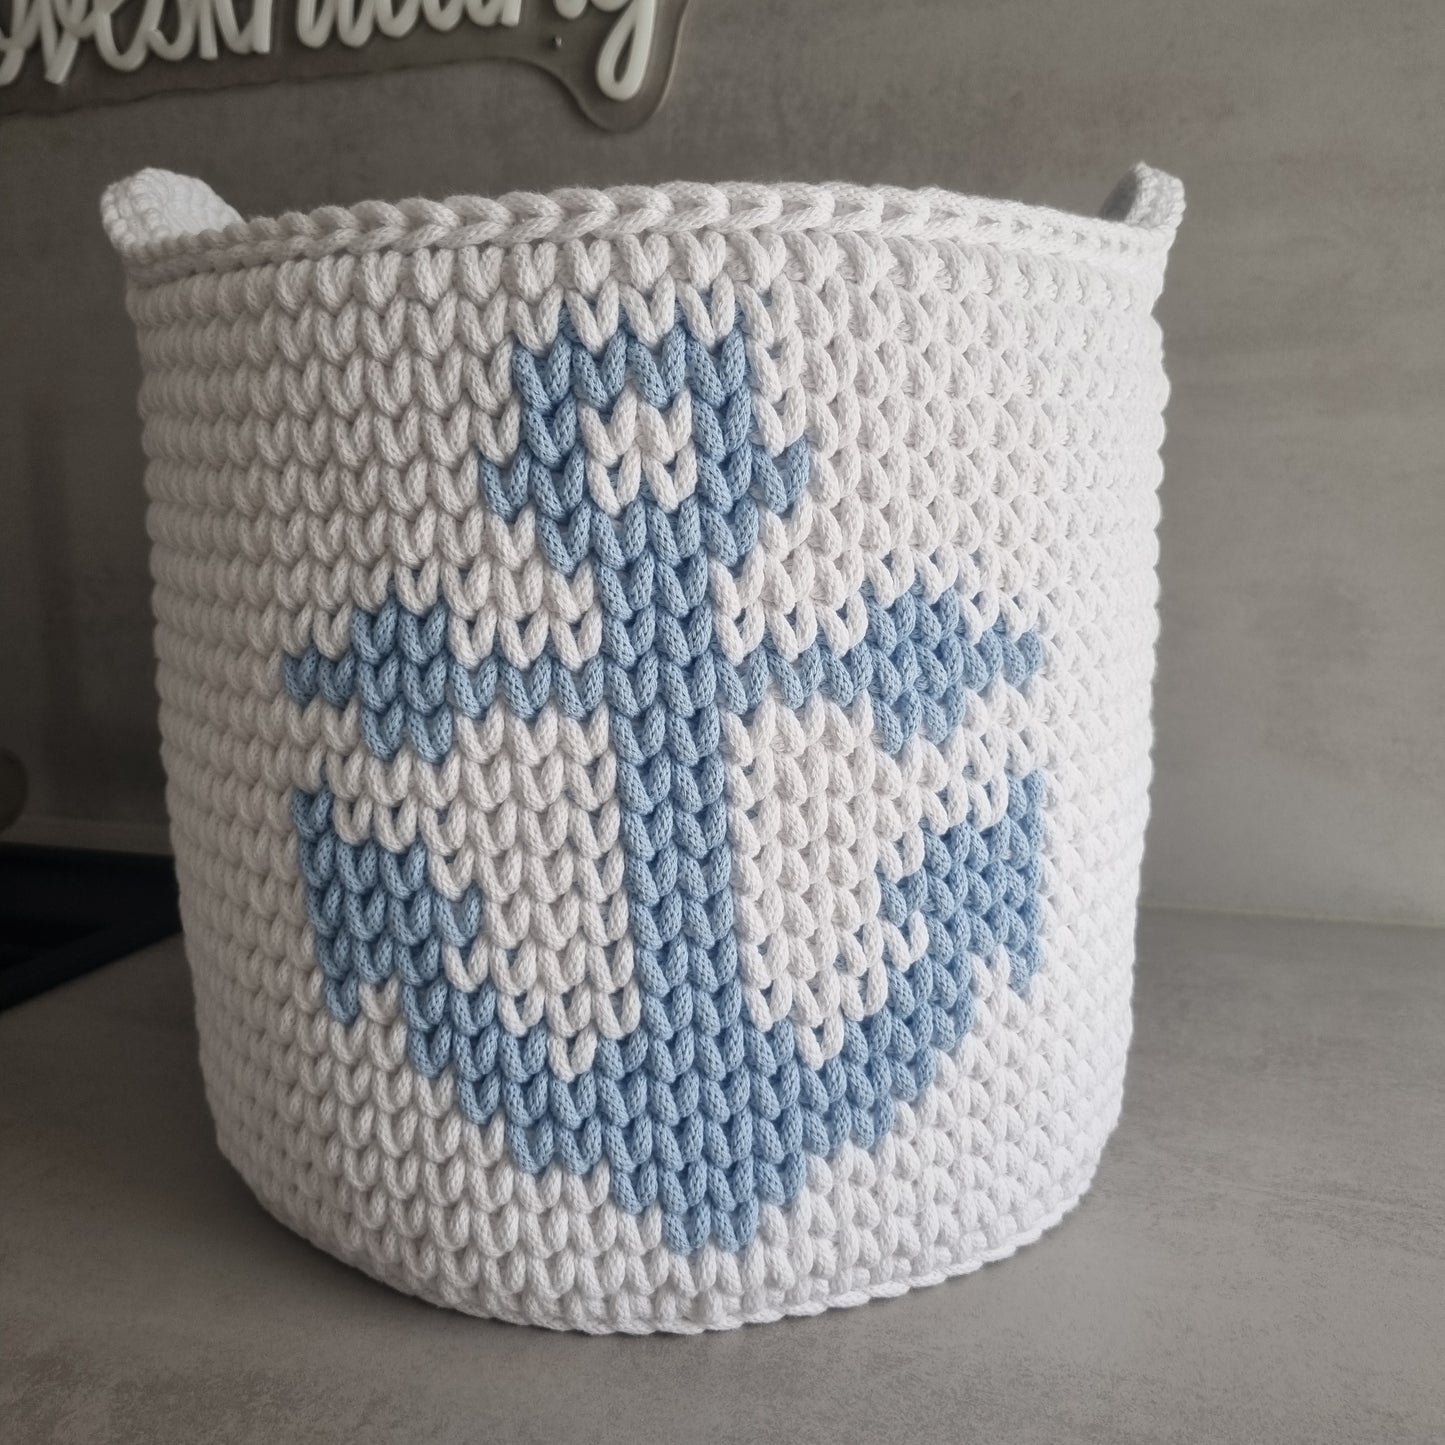 Children's room Baby room Toy basket crocheted from recycled cotton